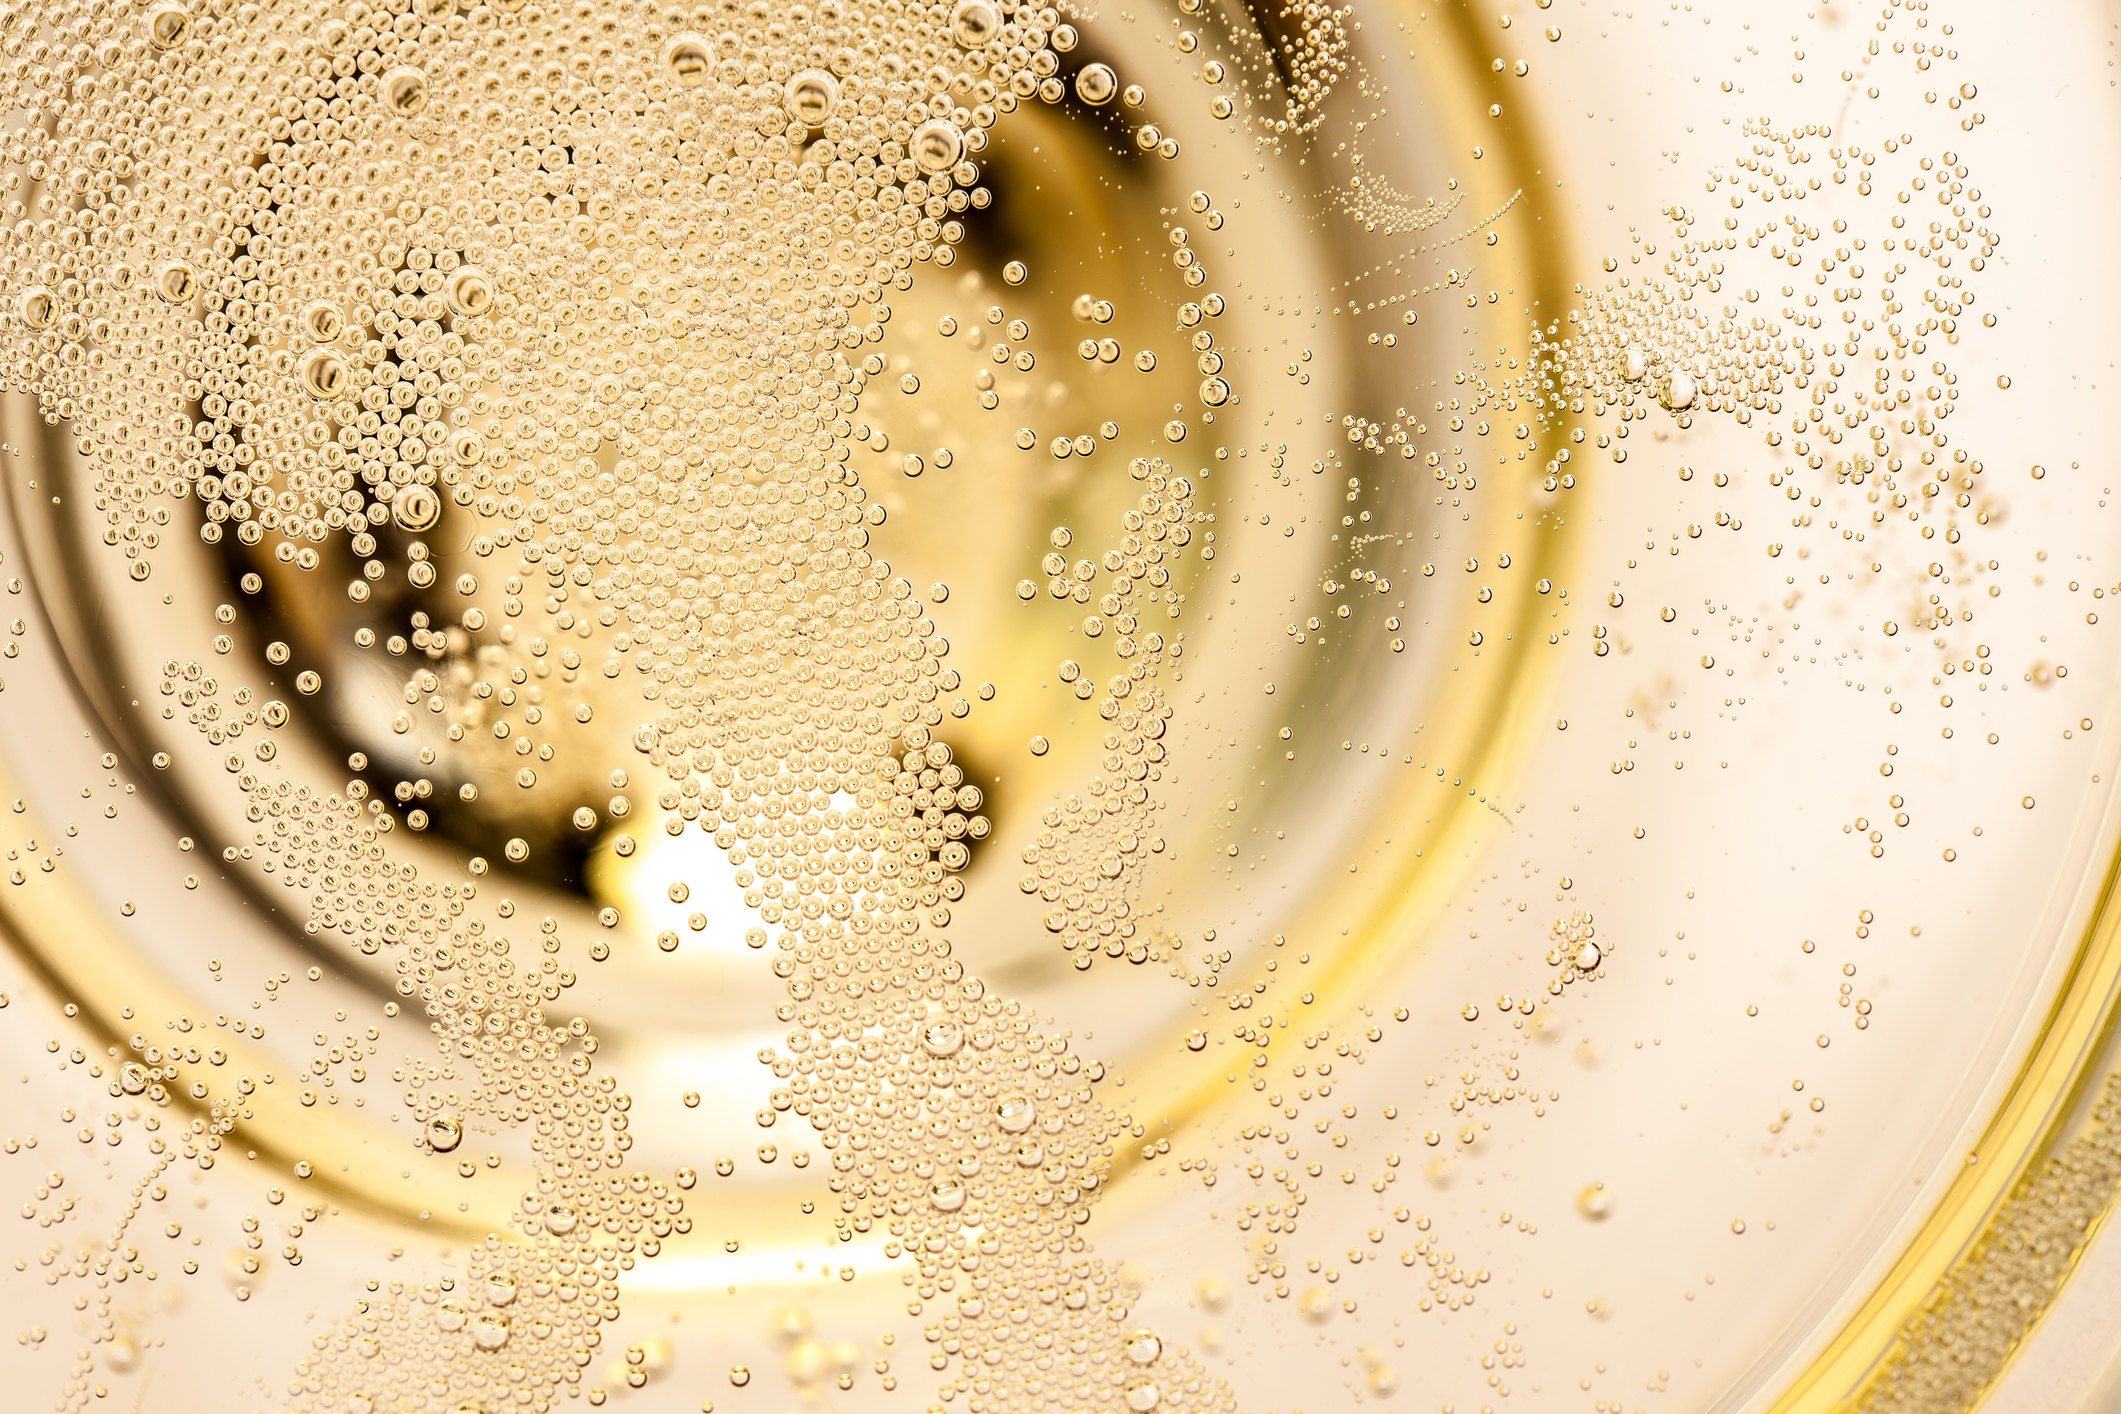 Champagne bubble in no danger of bursting says Moet Hennessy chief